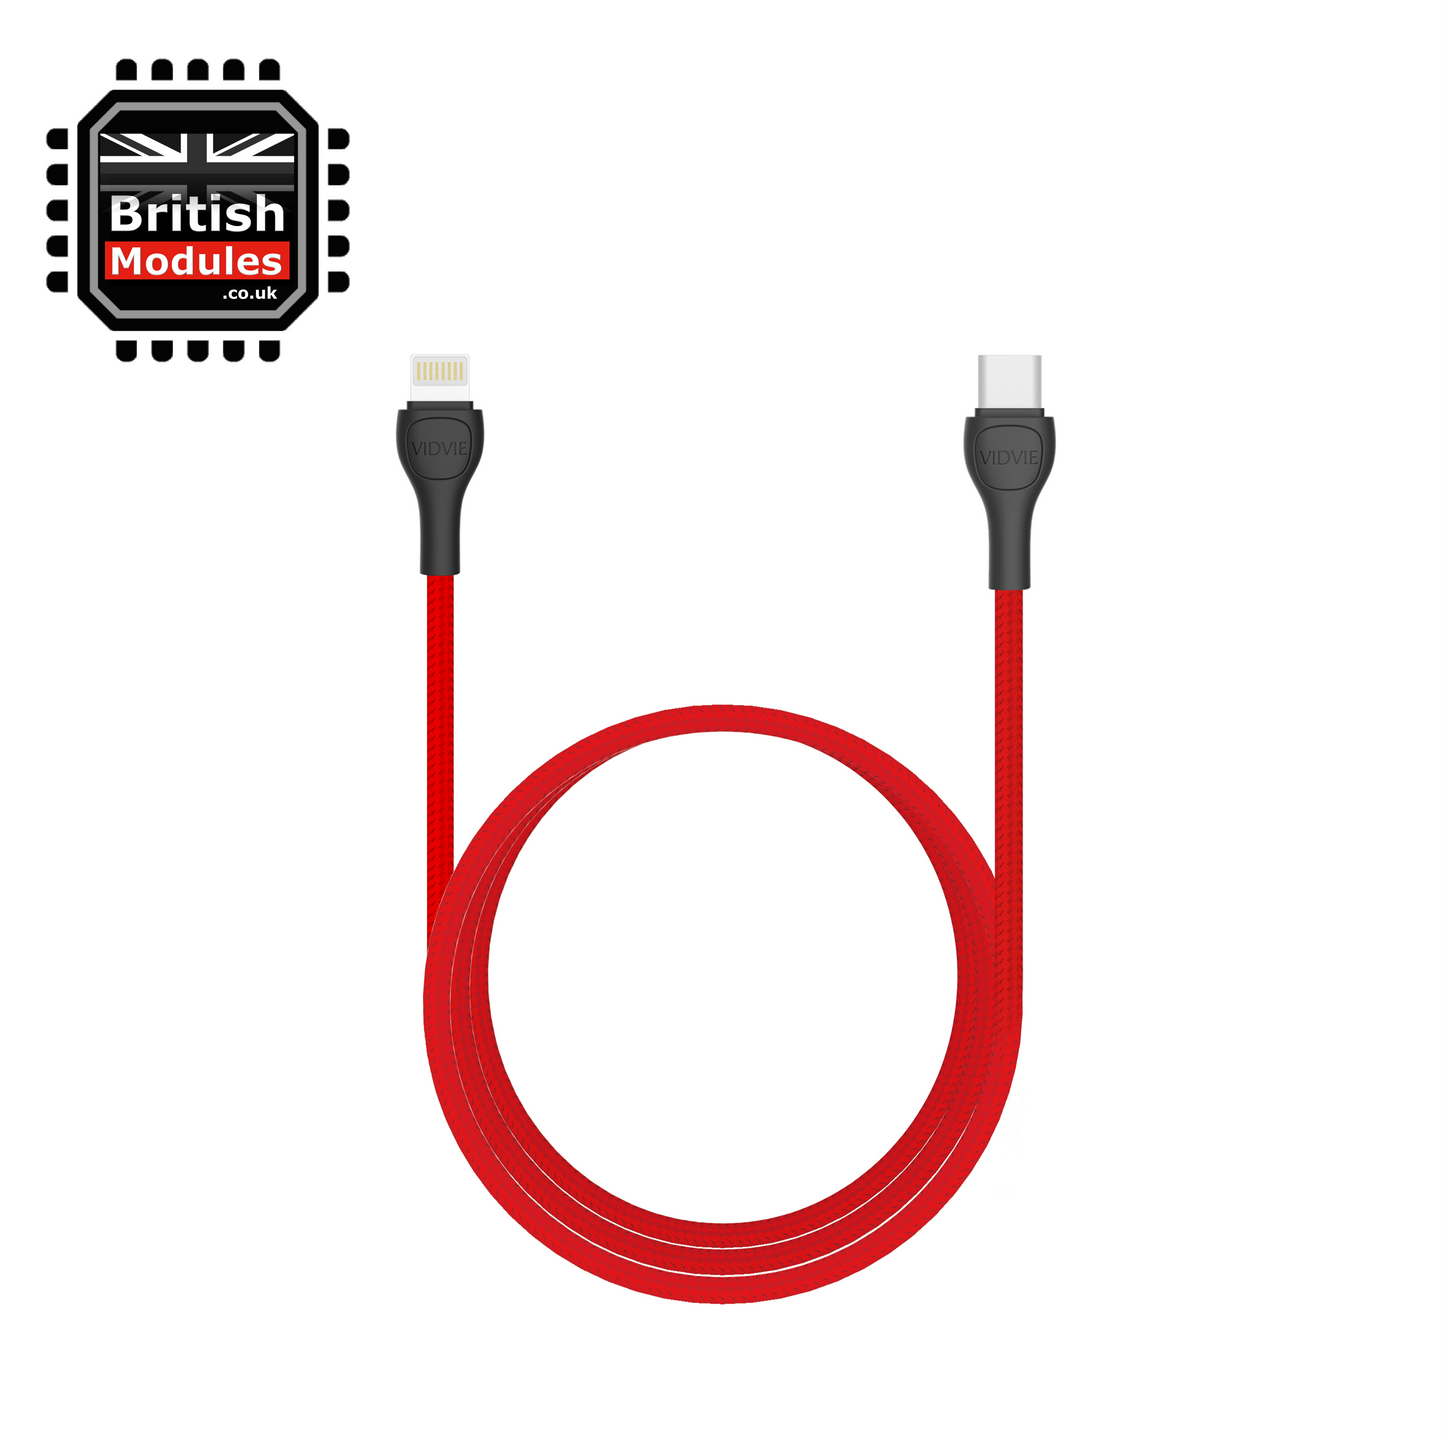 Premium iPhone Braided Fast Charging Cable Type-C to Lightning PD 20W by VidVie